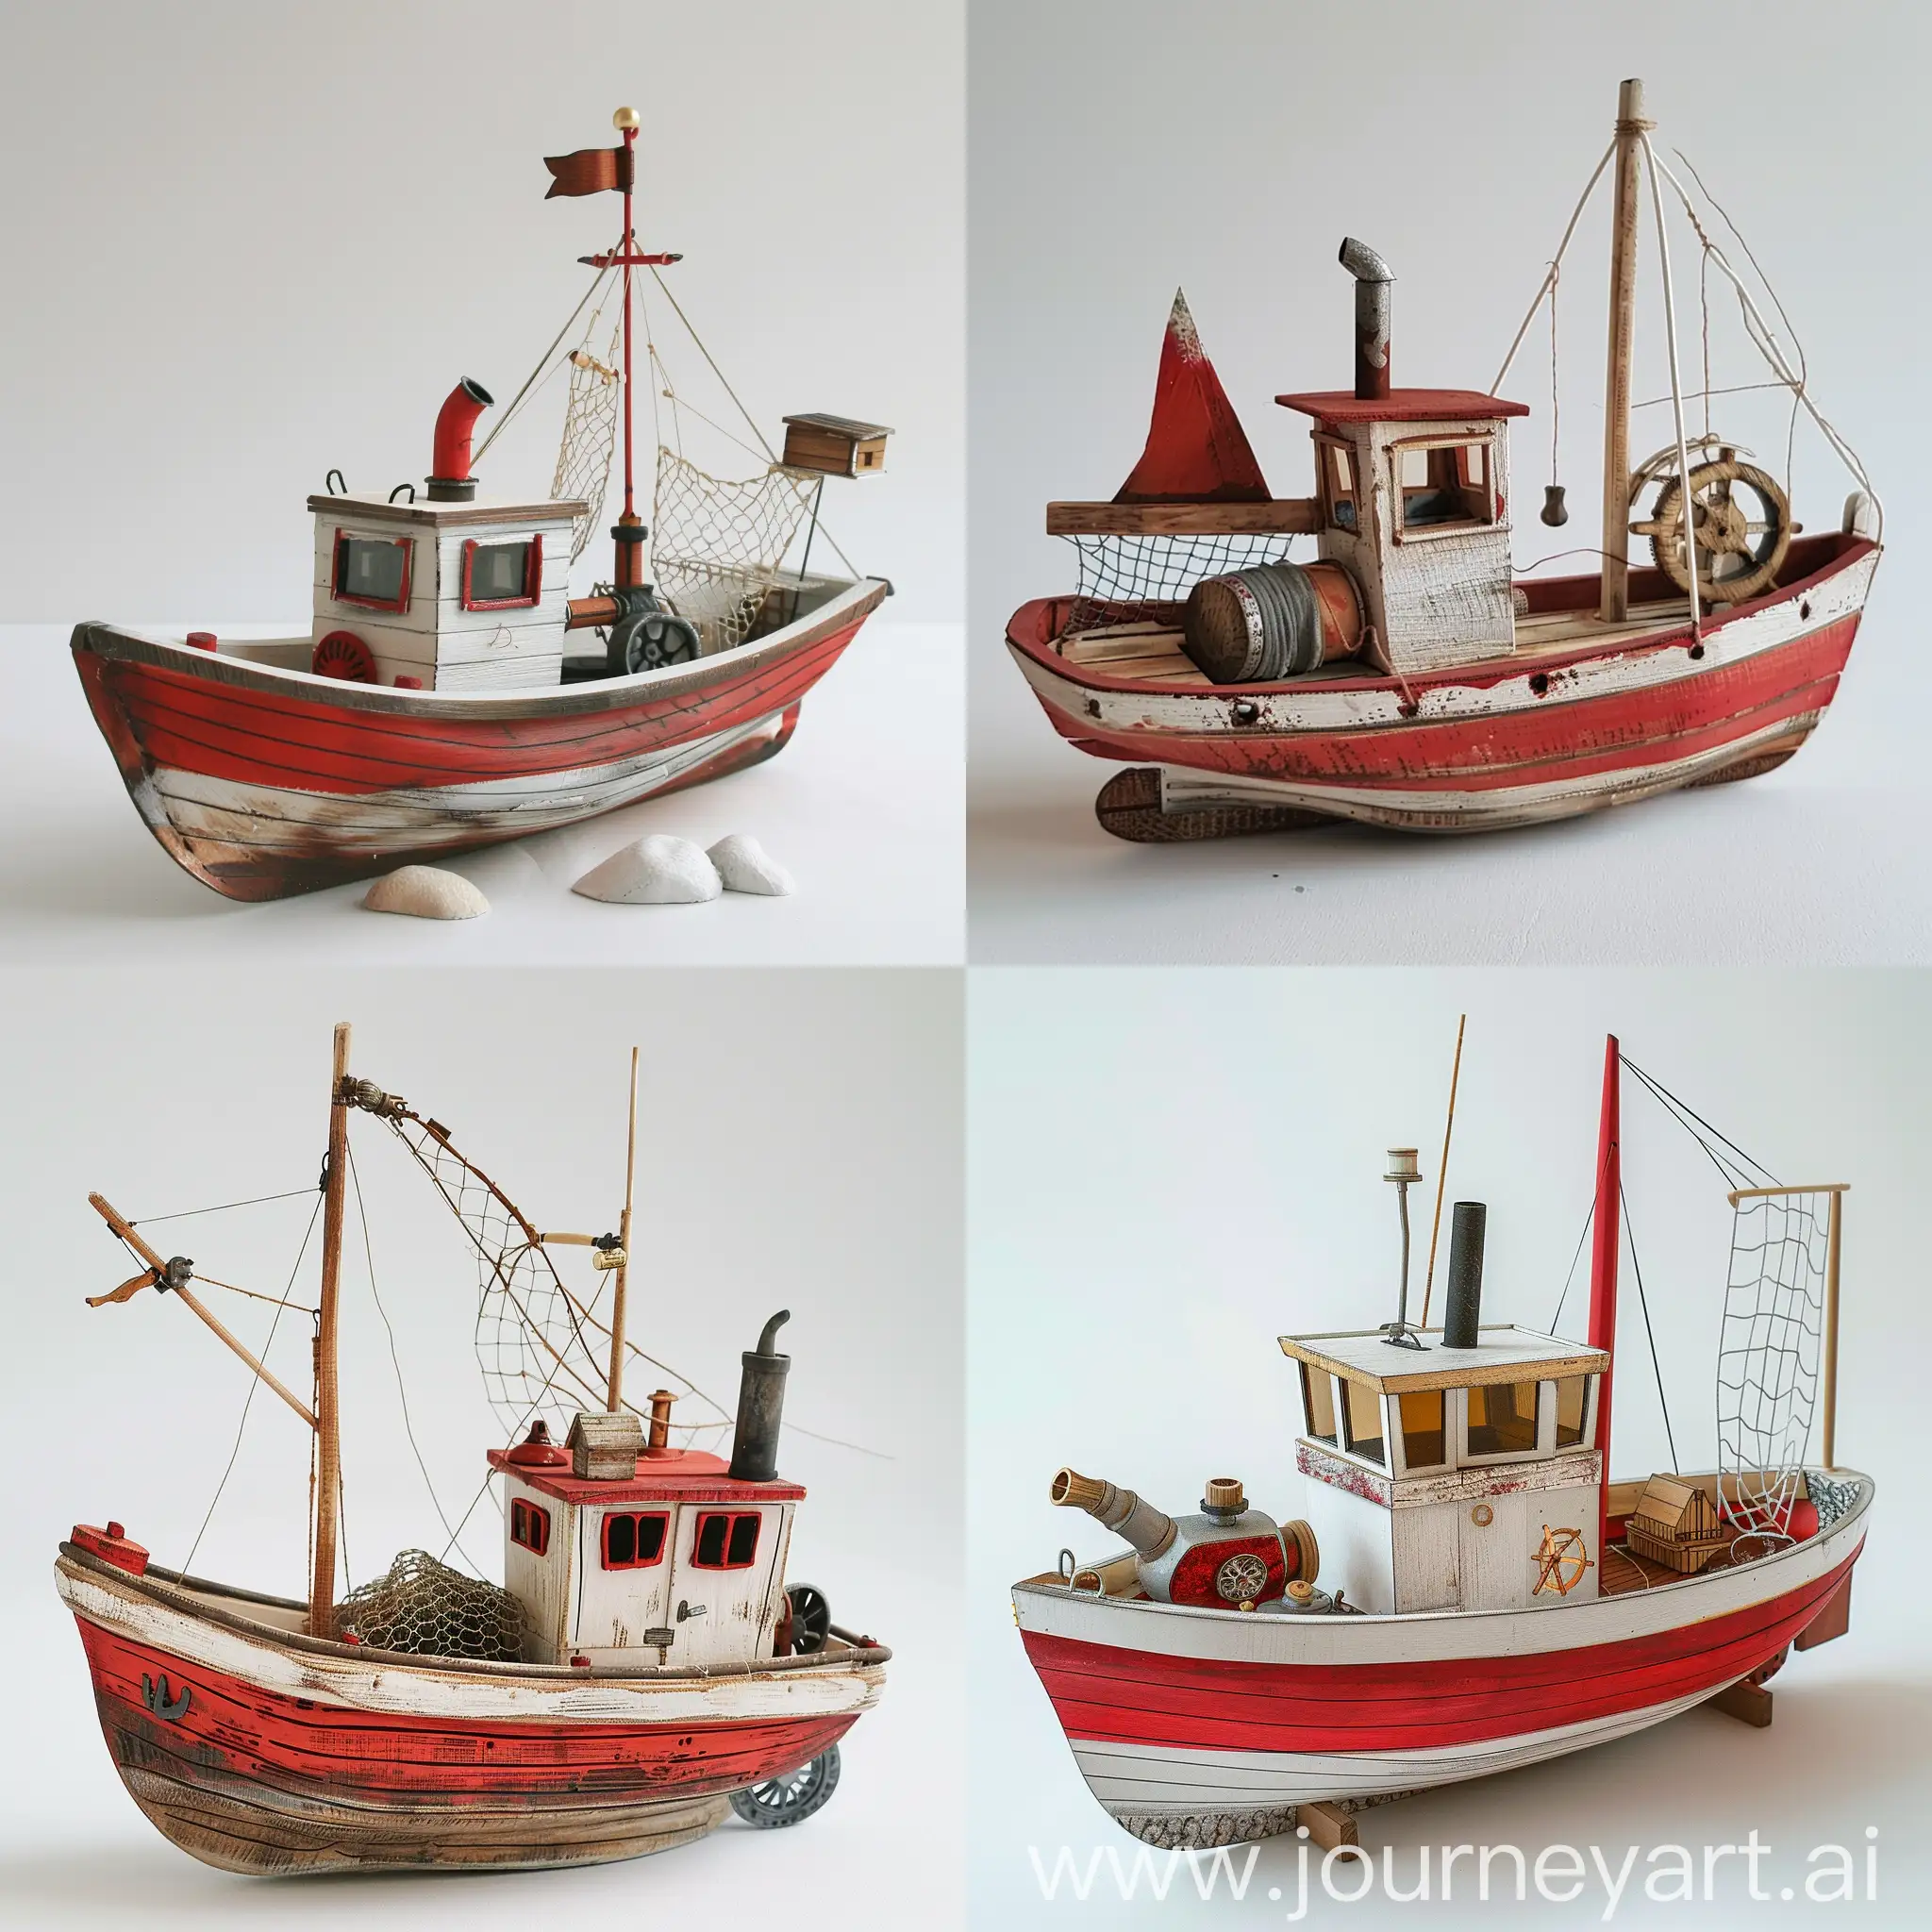 a small stylized fishing boat red and white paint made of wood with a tiny steam engine with one cabin room on it and a fishing net at the back